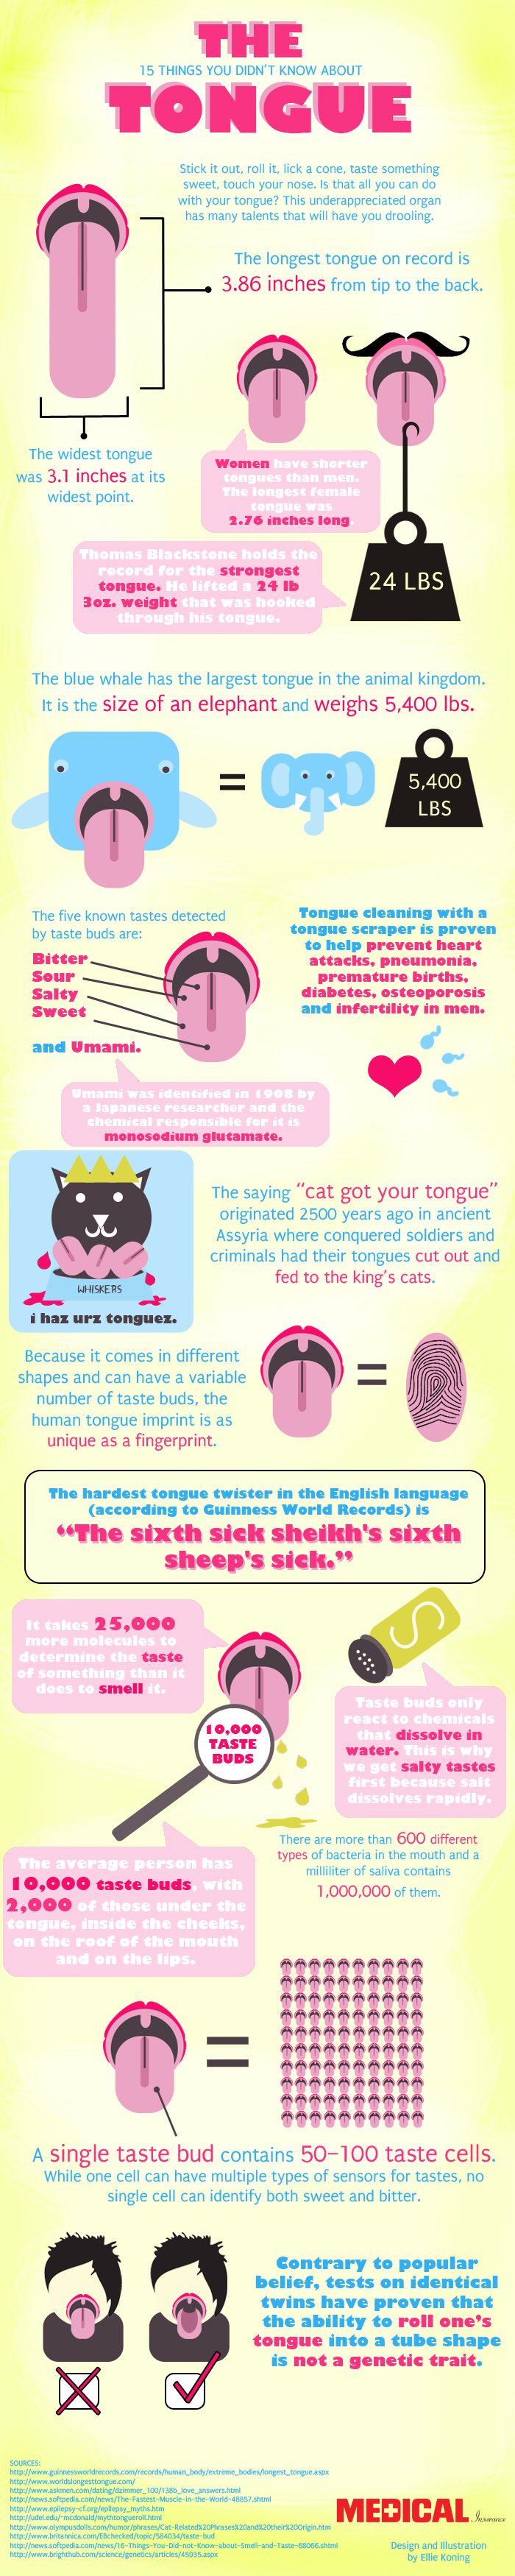 15 Things You Didn't Know About Tongue (infographic)